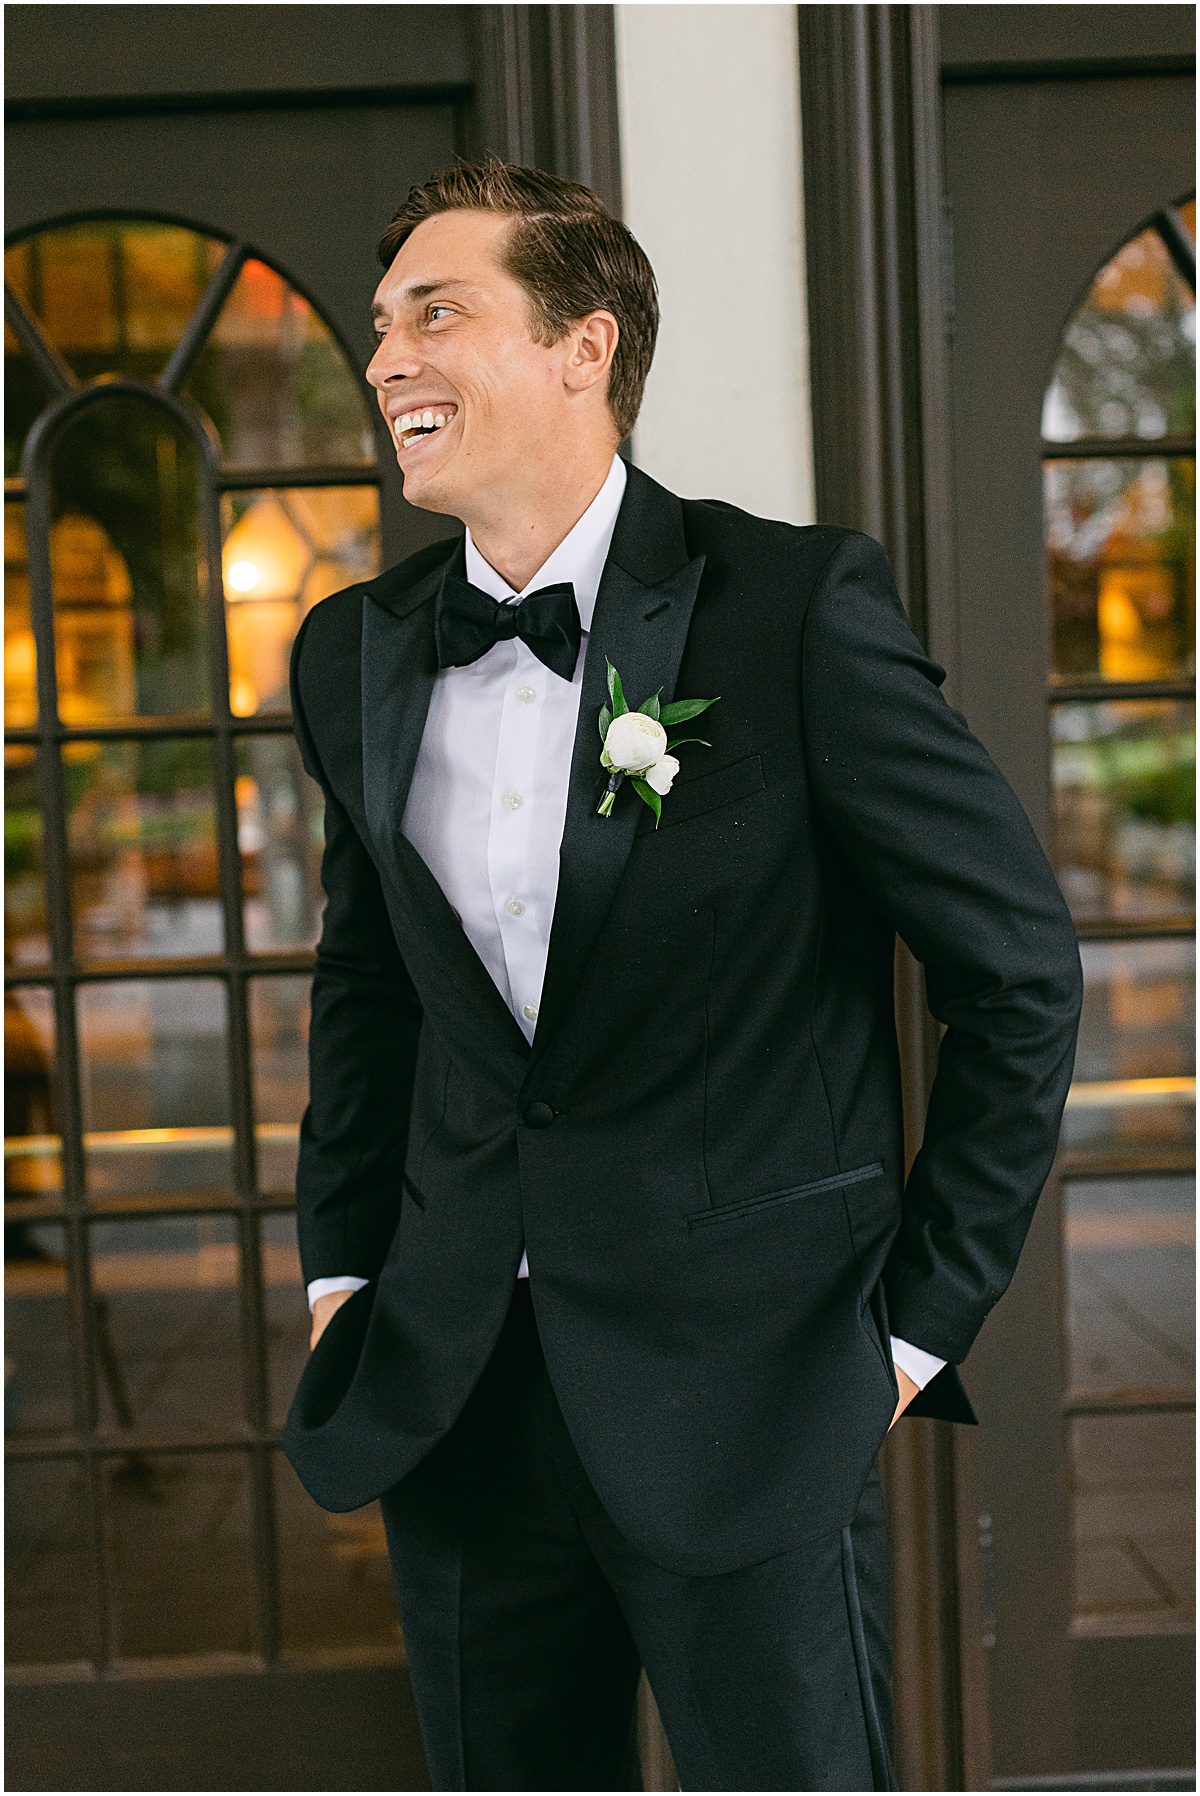 Laughing groom  at Congressional Country Club wedding by Sarah Bradshaw